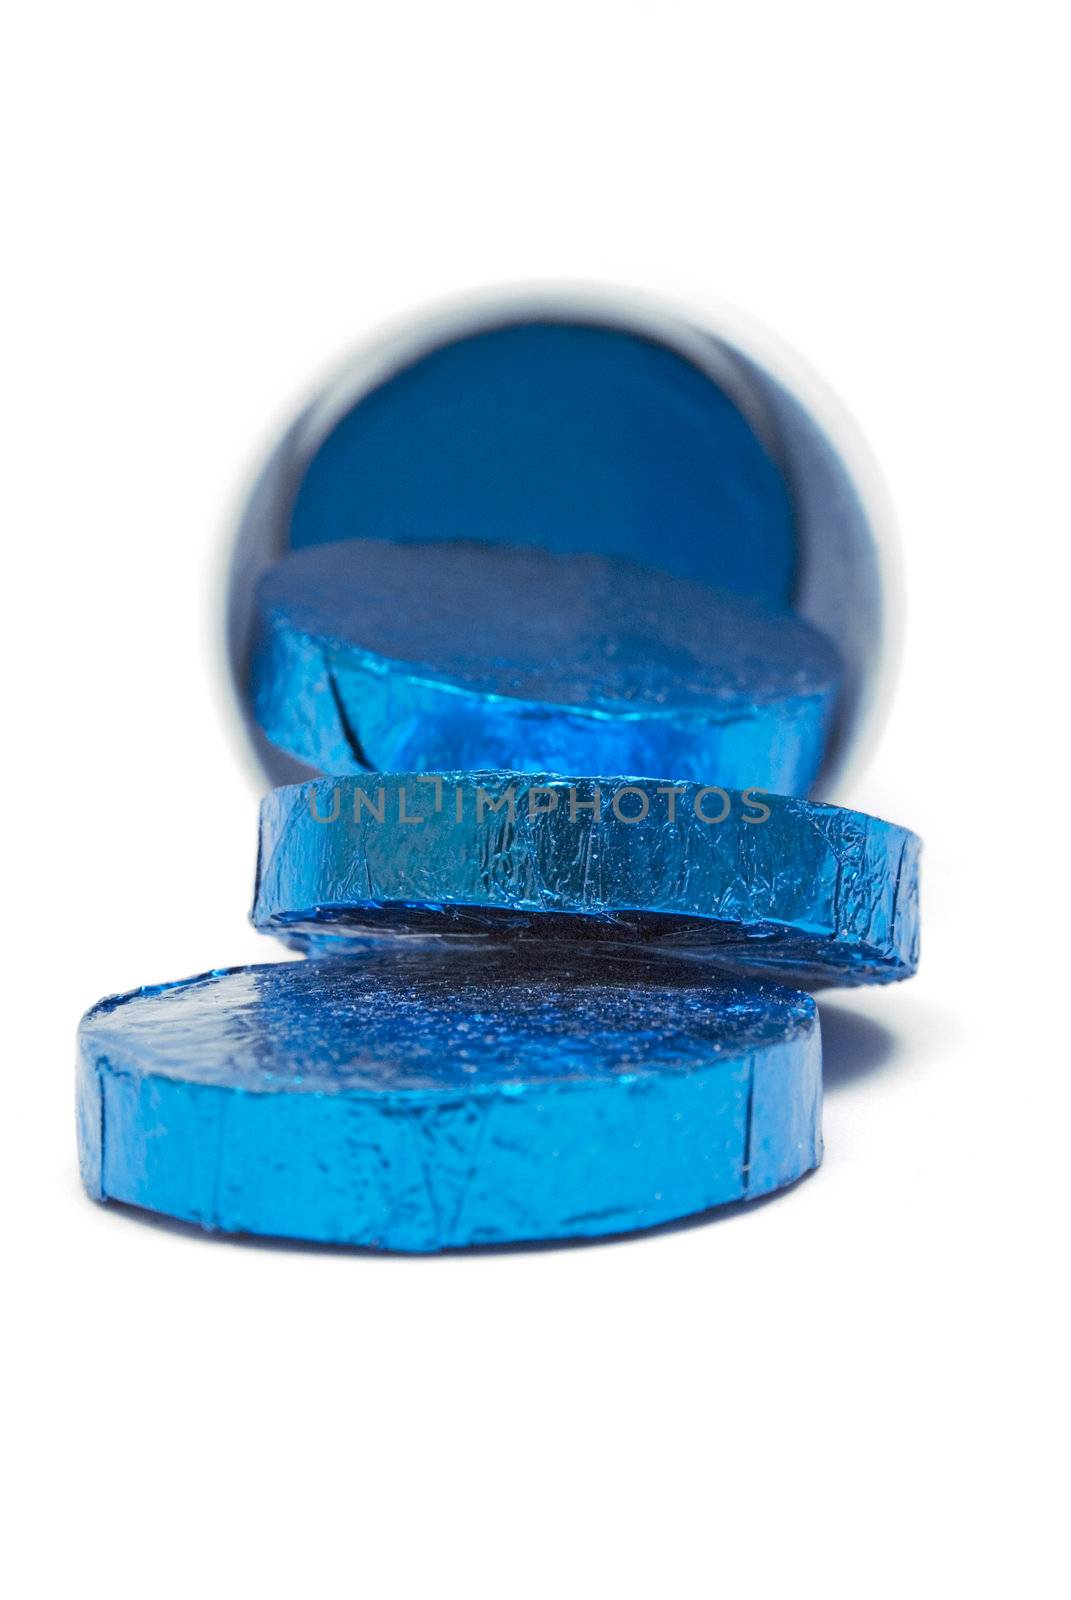 Wrapped pills in a plastic container isolated on a white background.